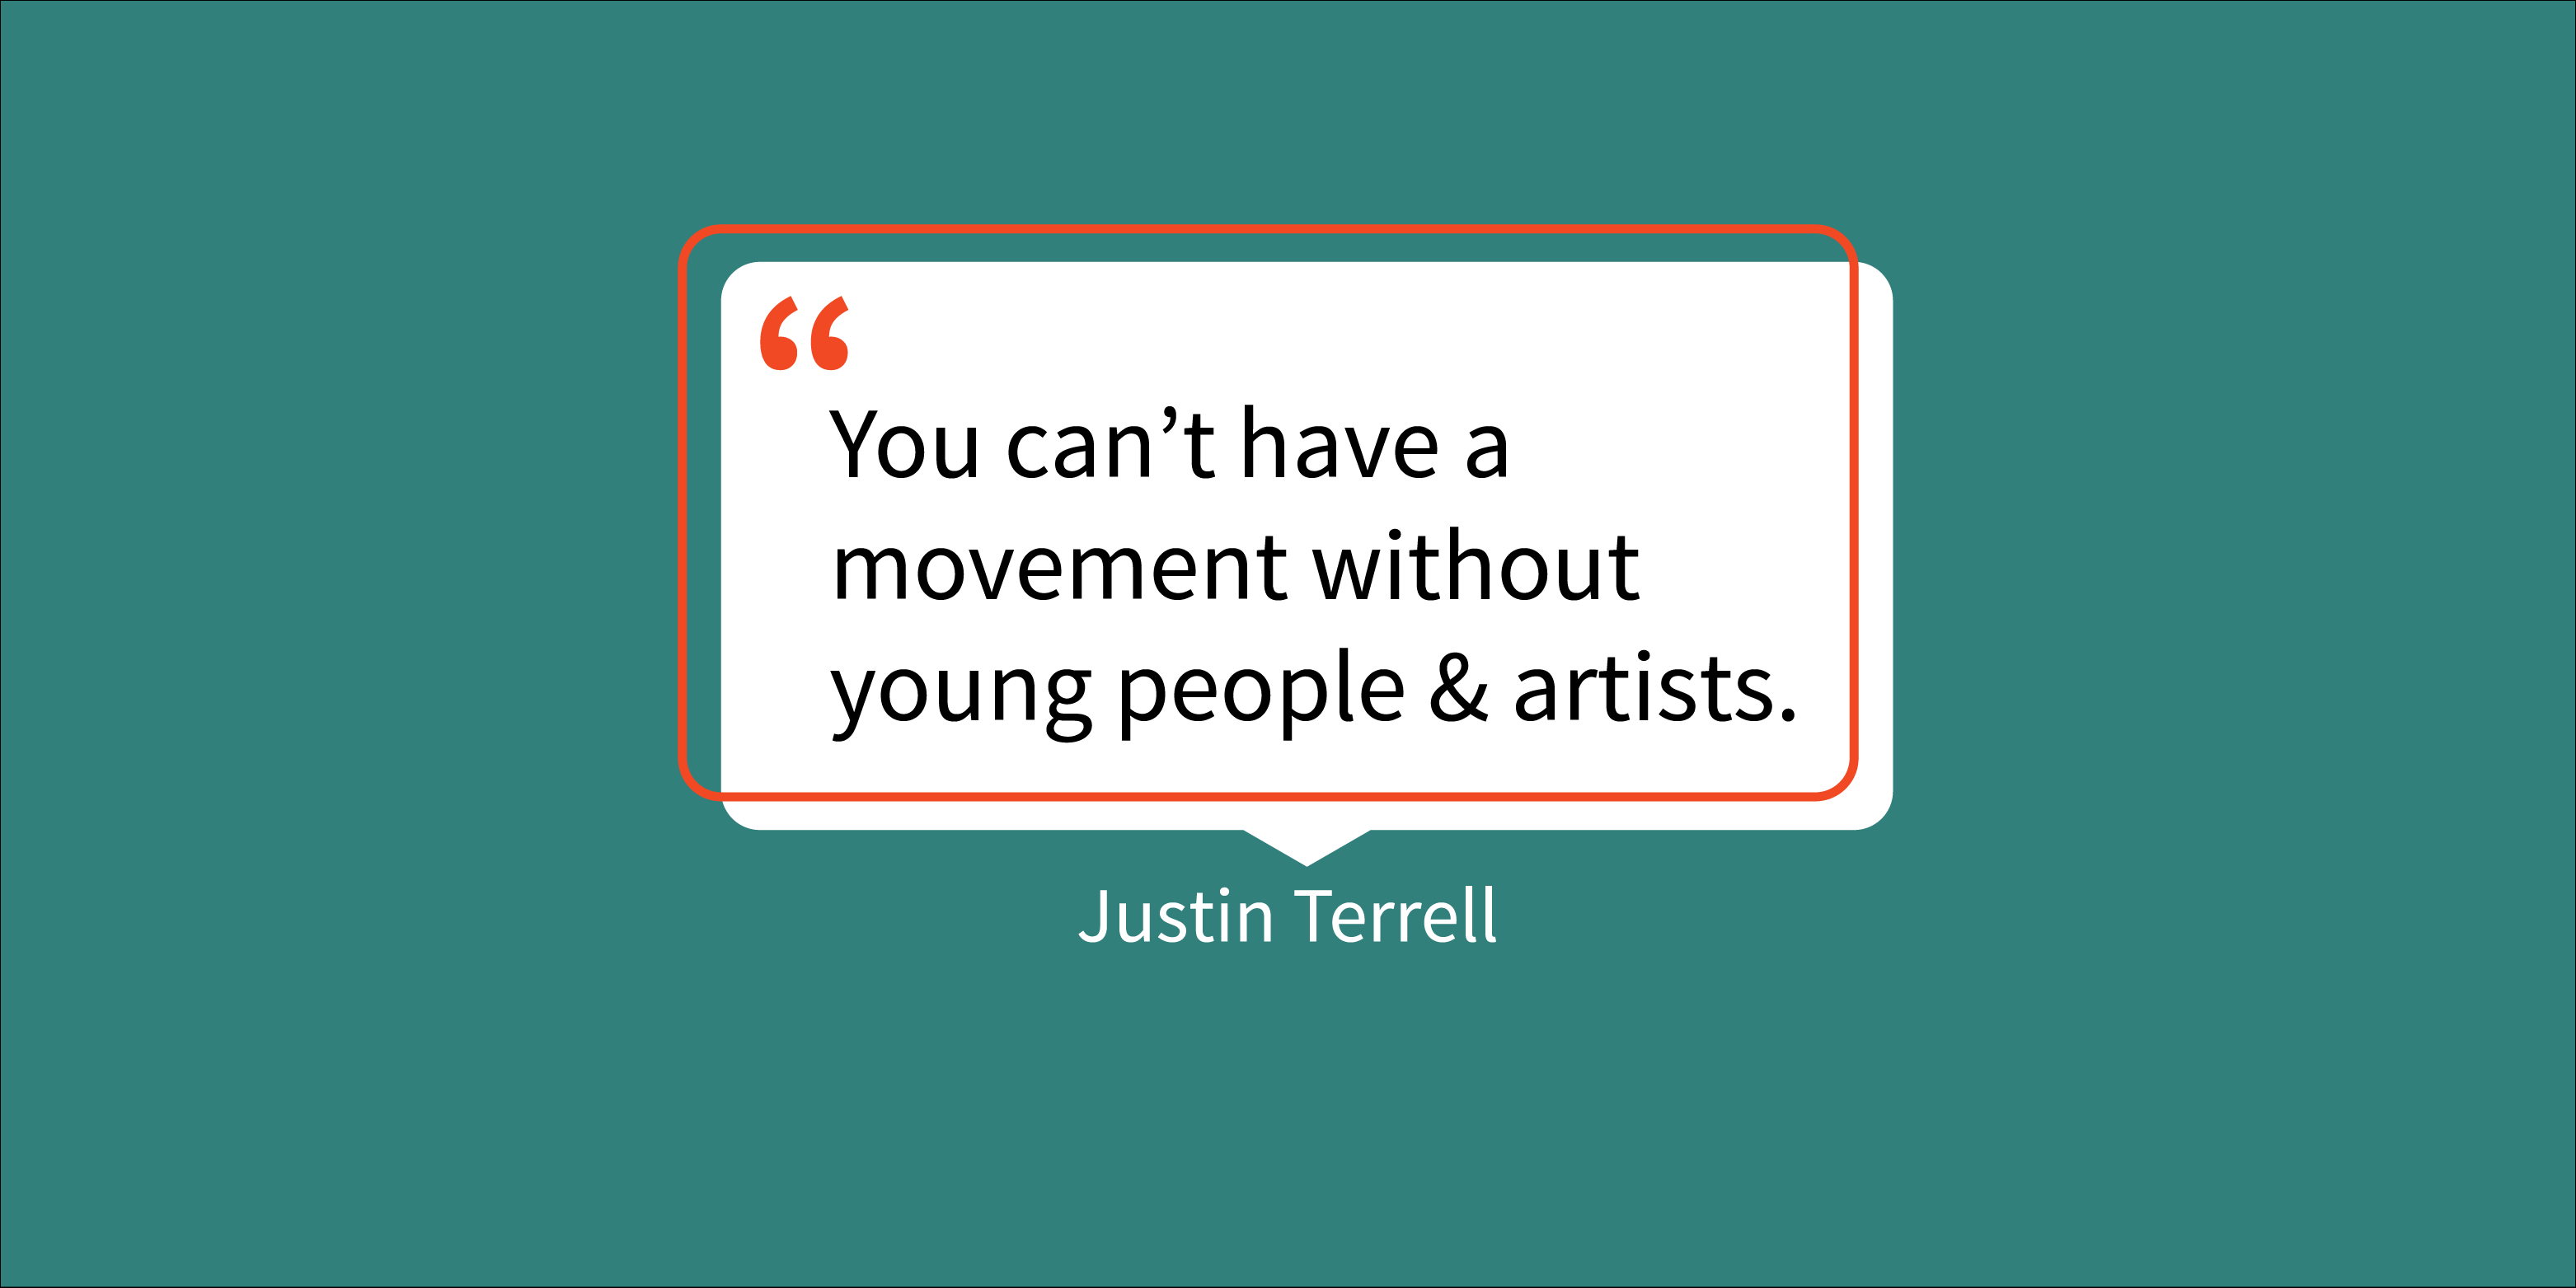 Stylized quotation which reads "You can’t have a movement without young people. Gen Z, let’s continue to be changemakers!” - Justin Terrell